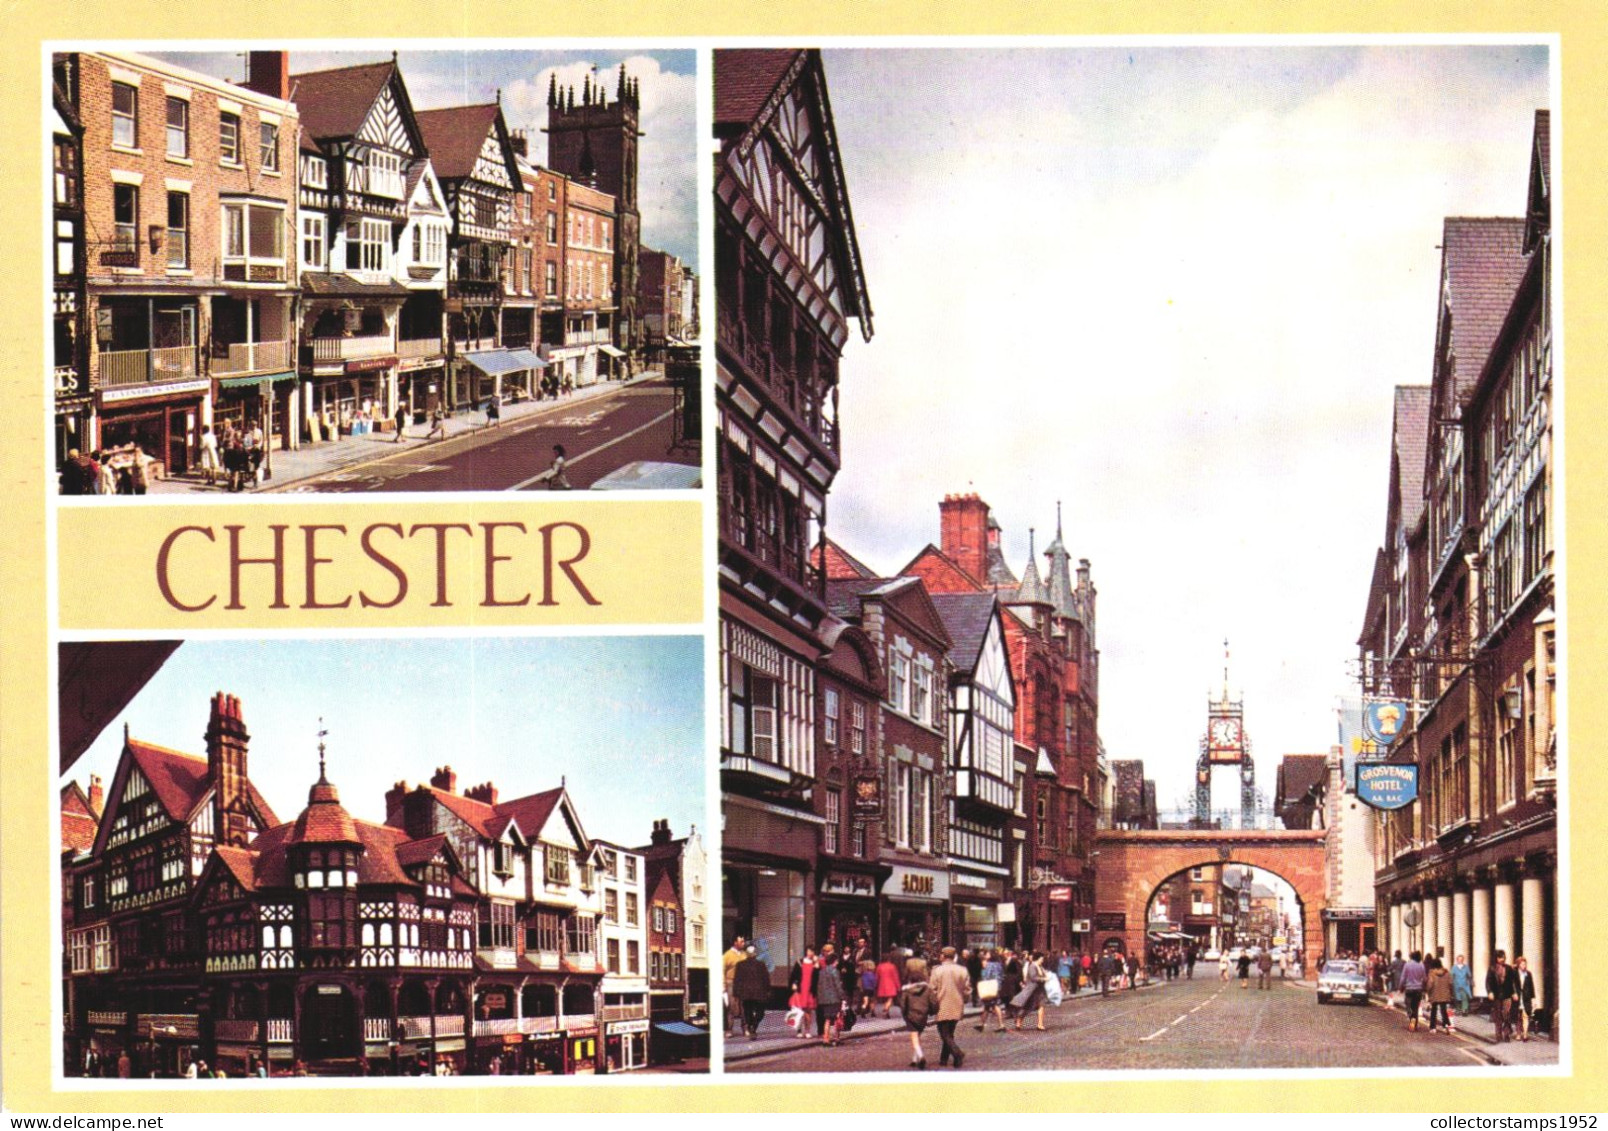 CHESTER, MULTIPLE VIEWS, ARCHITECTURE, CAR, GATE, TOWER WITH CLOCK, UNITED KINGDOM, POSTCARD - Chester